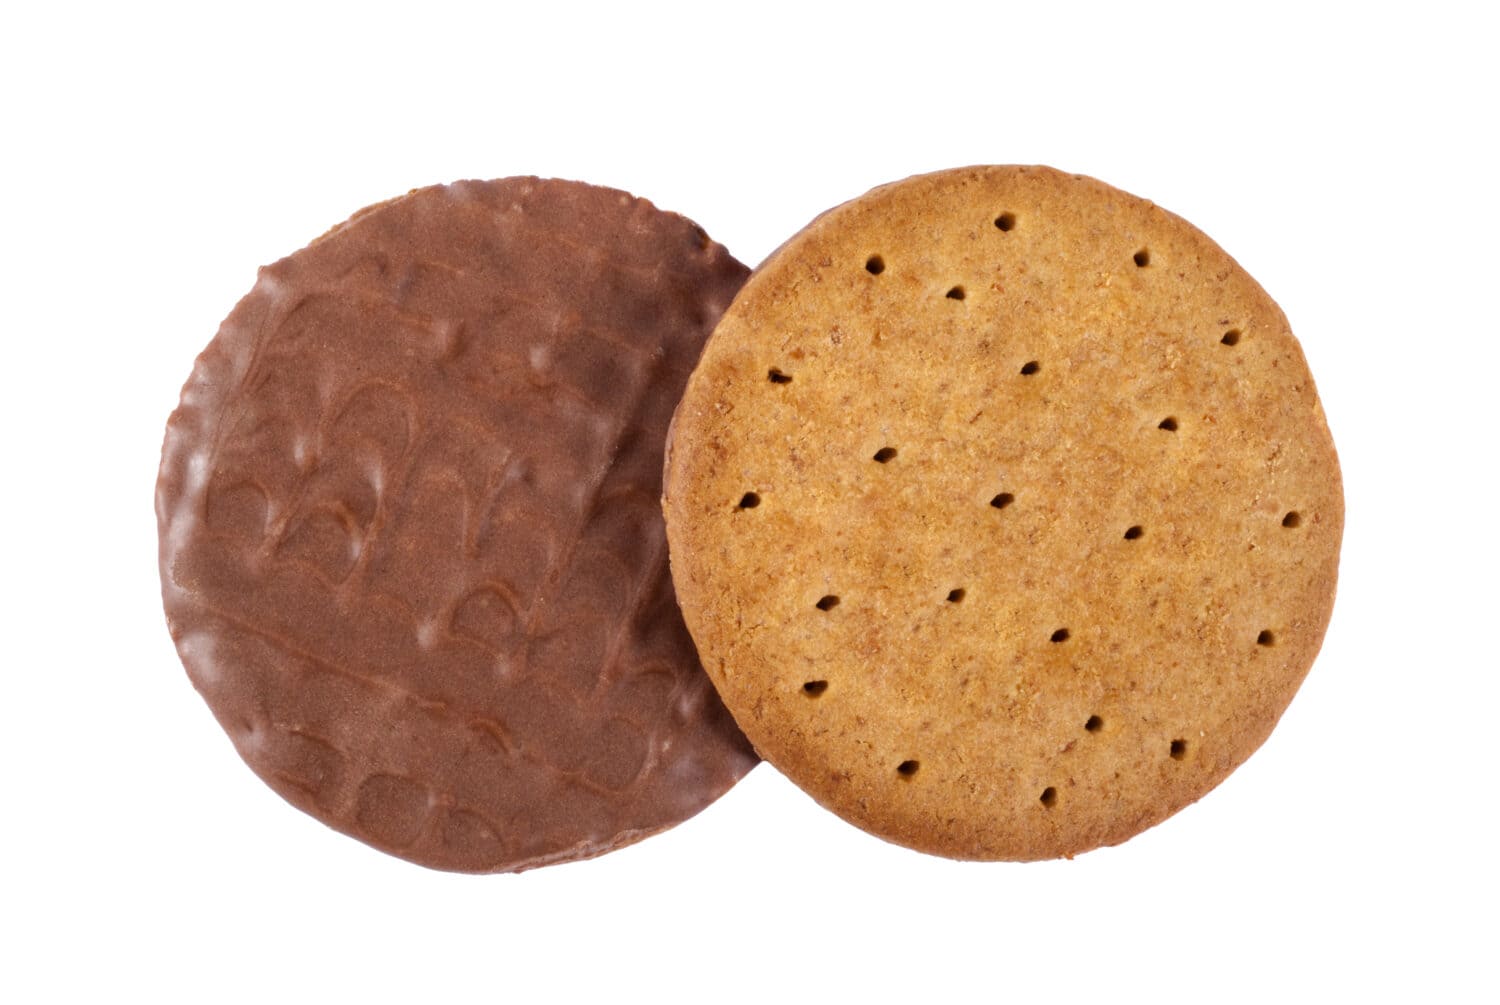 The top and bottom of a Chocolate Digestive biscuit.